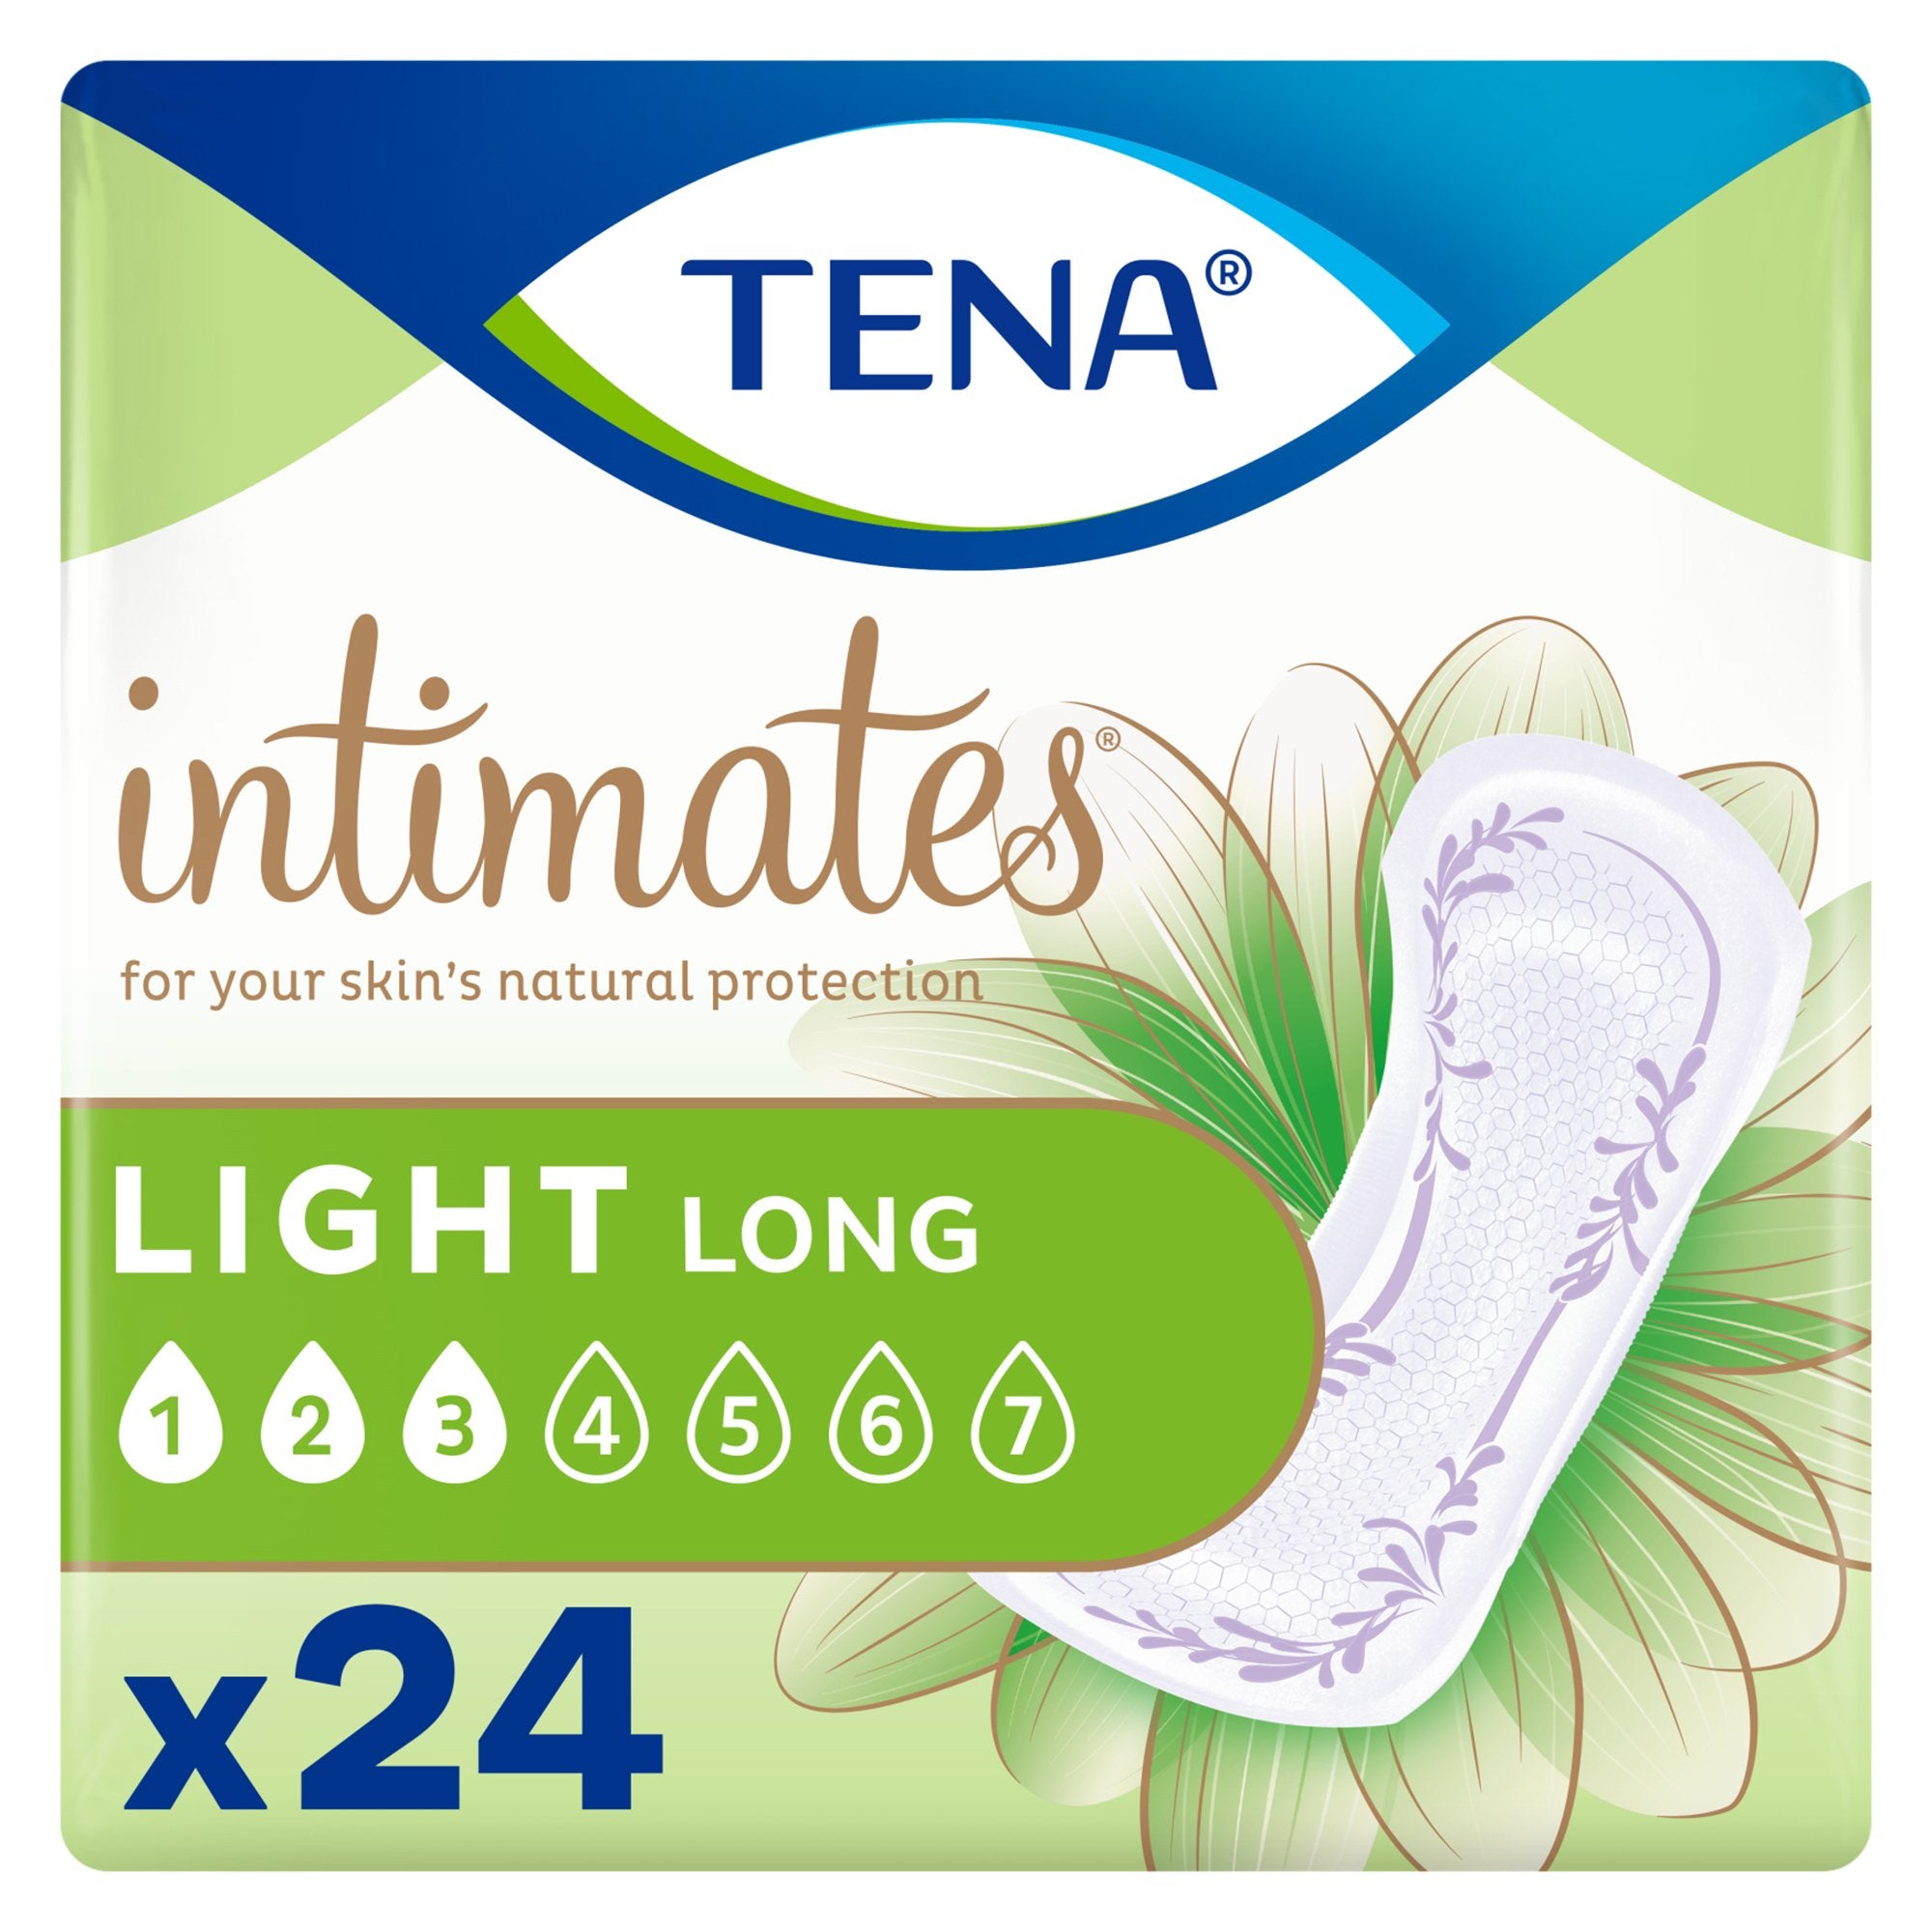 Bladder Control Pad TENA Intimates Ultra Thin Light Long 10 Inch Length Light Absorbency Dry-Fast Core One Size Fits Most